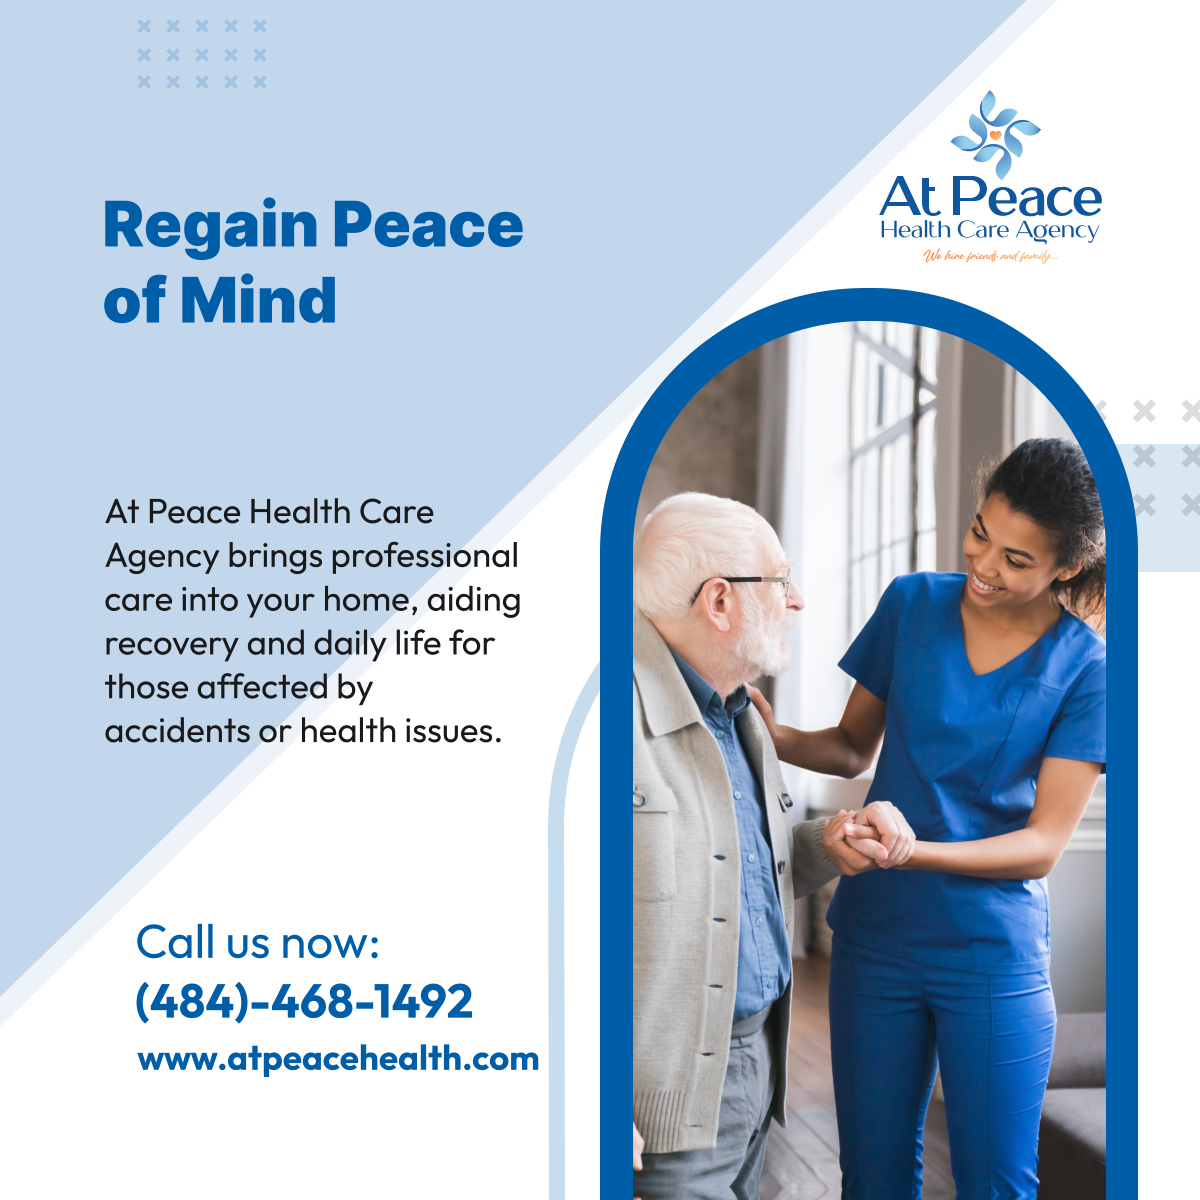 Experience tranquility and recovery with our trained aides and RNs, offering comprehensive care to help your loved ones thrive. Reach out to us now! 

#PhiladelphiaPA #HomeHealthCare #RecoveryAtHome